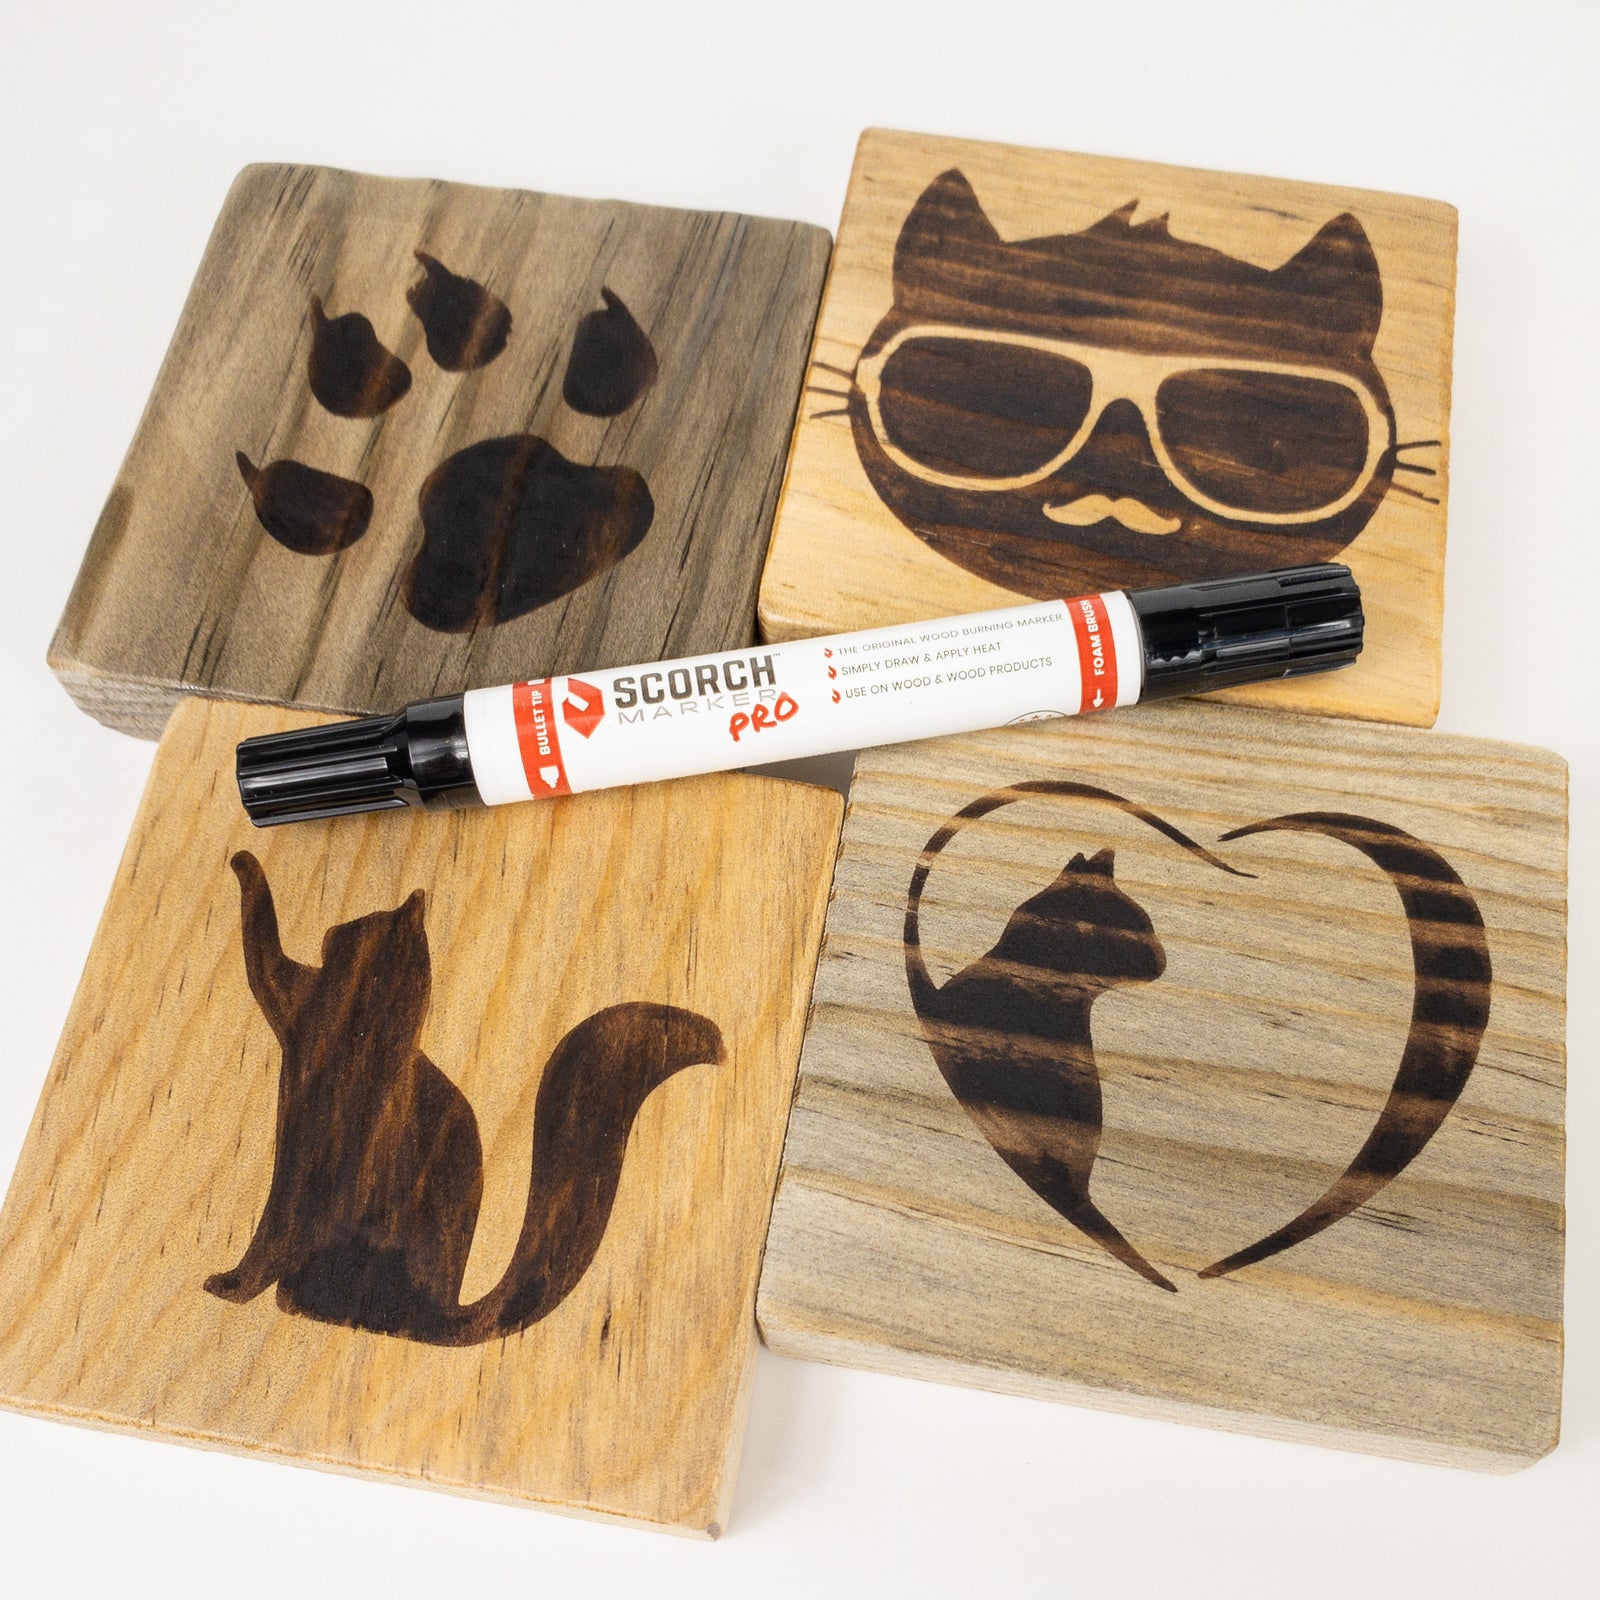 Easy wood burning projects  step by step DIY pyrography blog